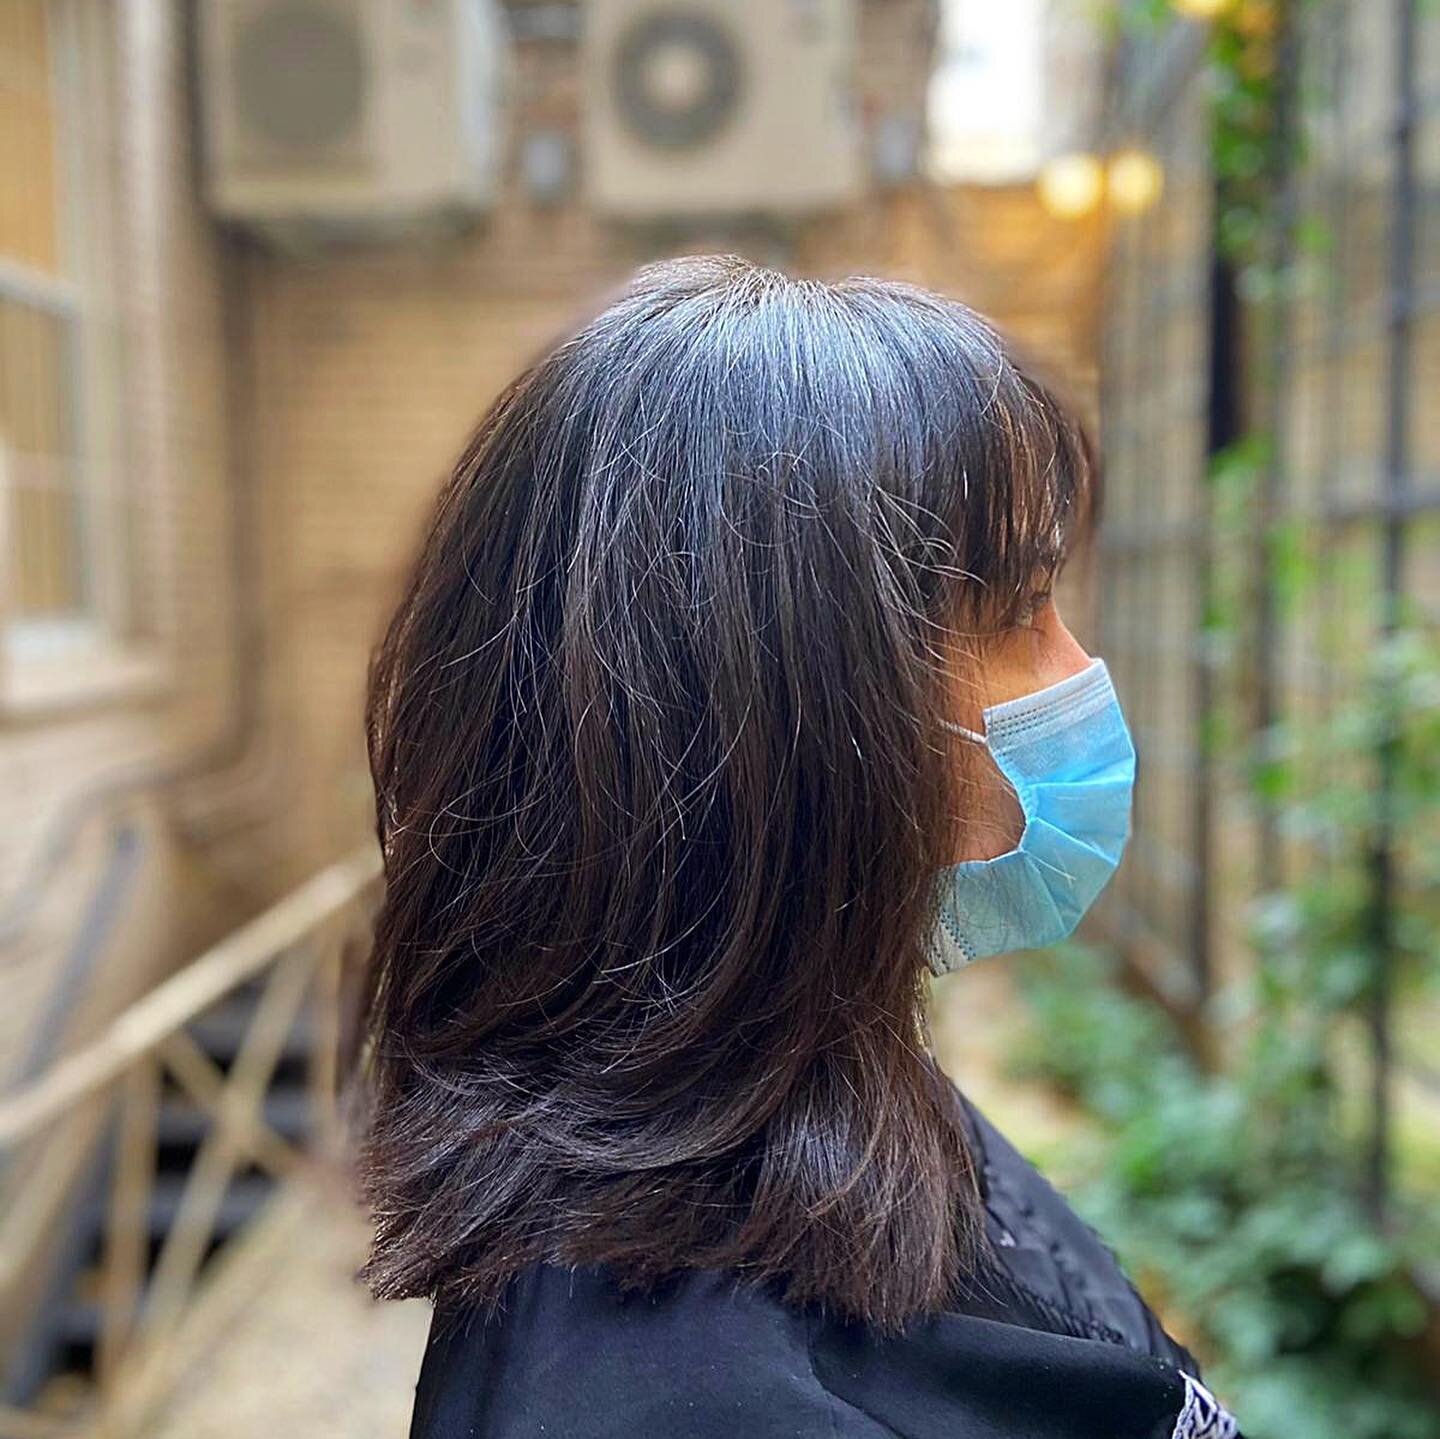 LAYERS PLEASE ❄️ 
That&rsquo;s all you need this winter.
Haircut by Adel in our Secret 🤫 Garden.